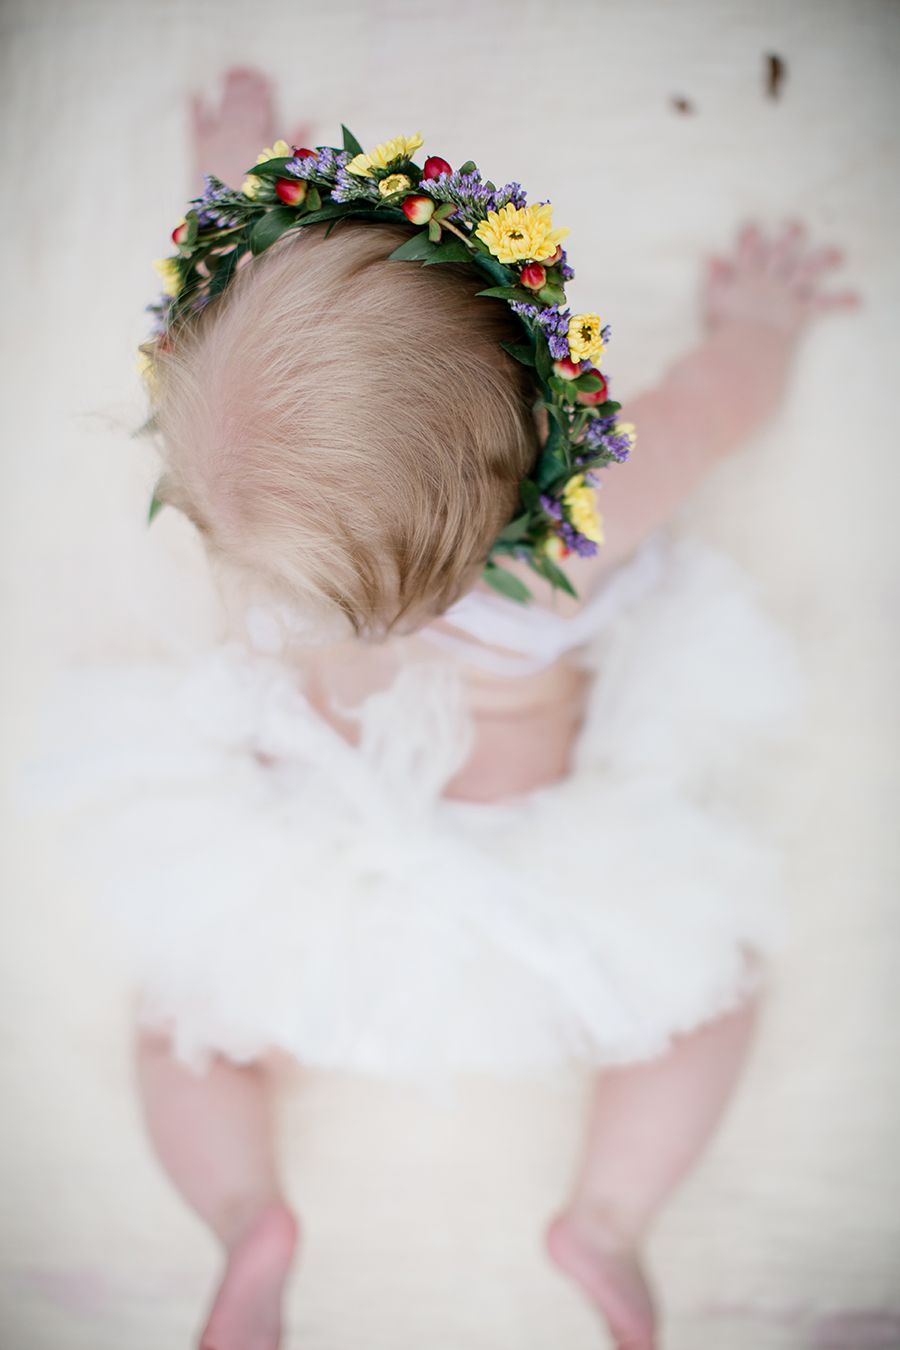 Naked in a tutu by Knoxville Wedding Photographer, Amanda May Photos.